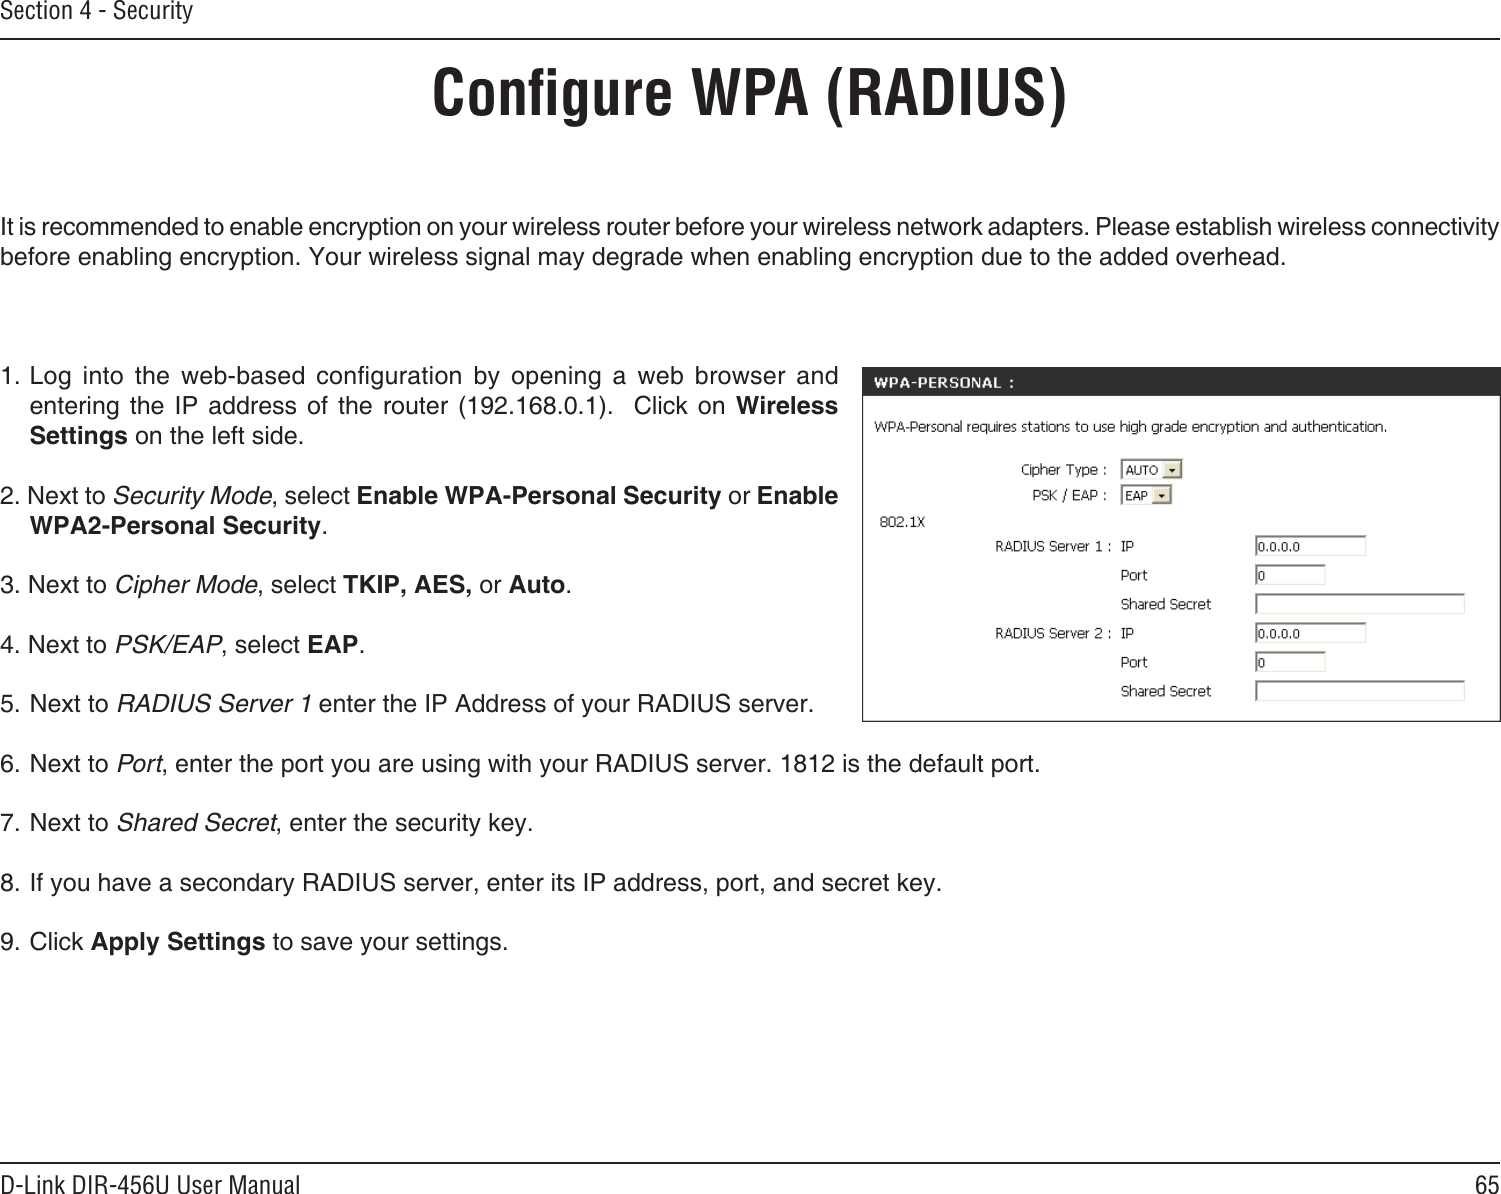 65D-Link DIR-456U User ManualSection 4 - SecurityConﬁgure WPA (RADIUS)It is recommended to enable encryption on your wireless router before your wireless network adapters. Please establish wireless connectivity before enabling encryption. Your wireless signal may degrade when enabling encryption due to the added overhead.1. Log  into  the  web-based  conguration  by  opening  a  web  browser  and entering  the  IP  address  of  the router  (192.168.0.1).   Click  on  Wireless Settings on the left side.2. Next to Security Mode, select Enable WPA-Personal Security or Enable WPA2-Personal Security.3. Next to Cipher Mode, select TKIP, AES, or Auto.4. Next to PSK/EAP, select EAP.5. Next to RADIUS Server 1 enter the IP Address of your RADIUS server.6. Next to Port, enter the port you are using with your RADIUS server. 1812 is the default port.7. Next to Shared Secret, enter the security key.8. If you have a secondary RADIUS server, enter its IP address, port, and secret key.9. Click Apply Settings to save your settings.